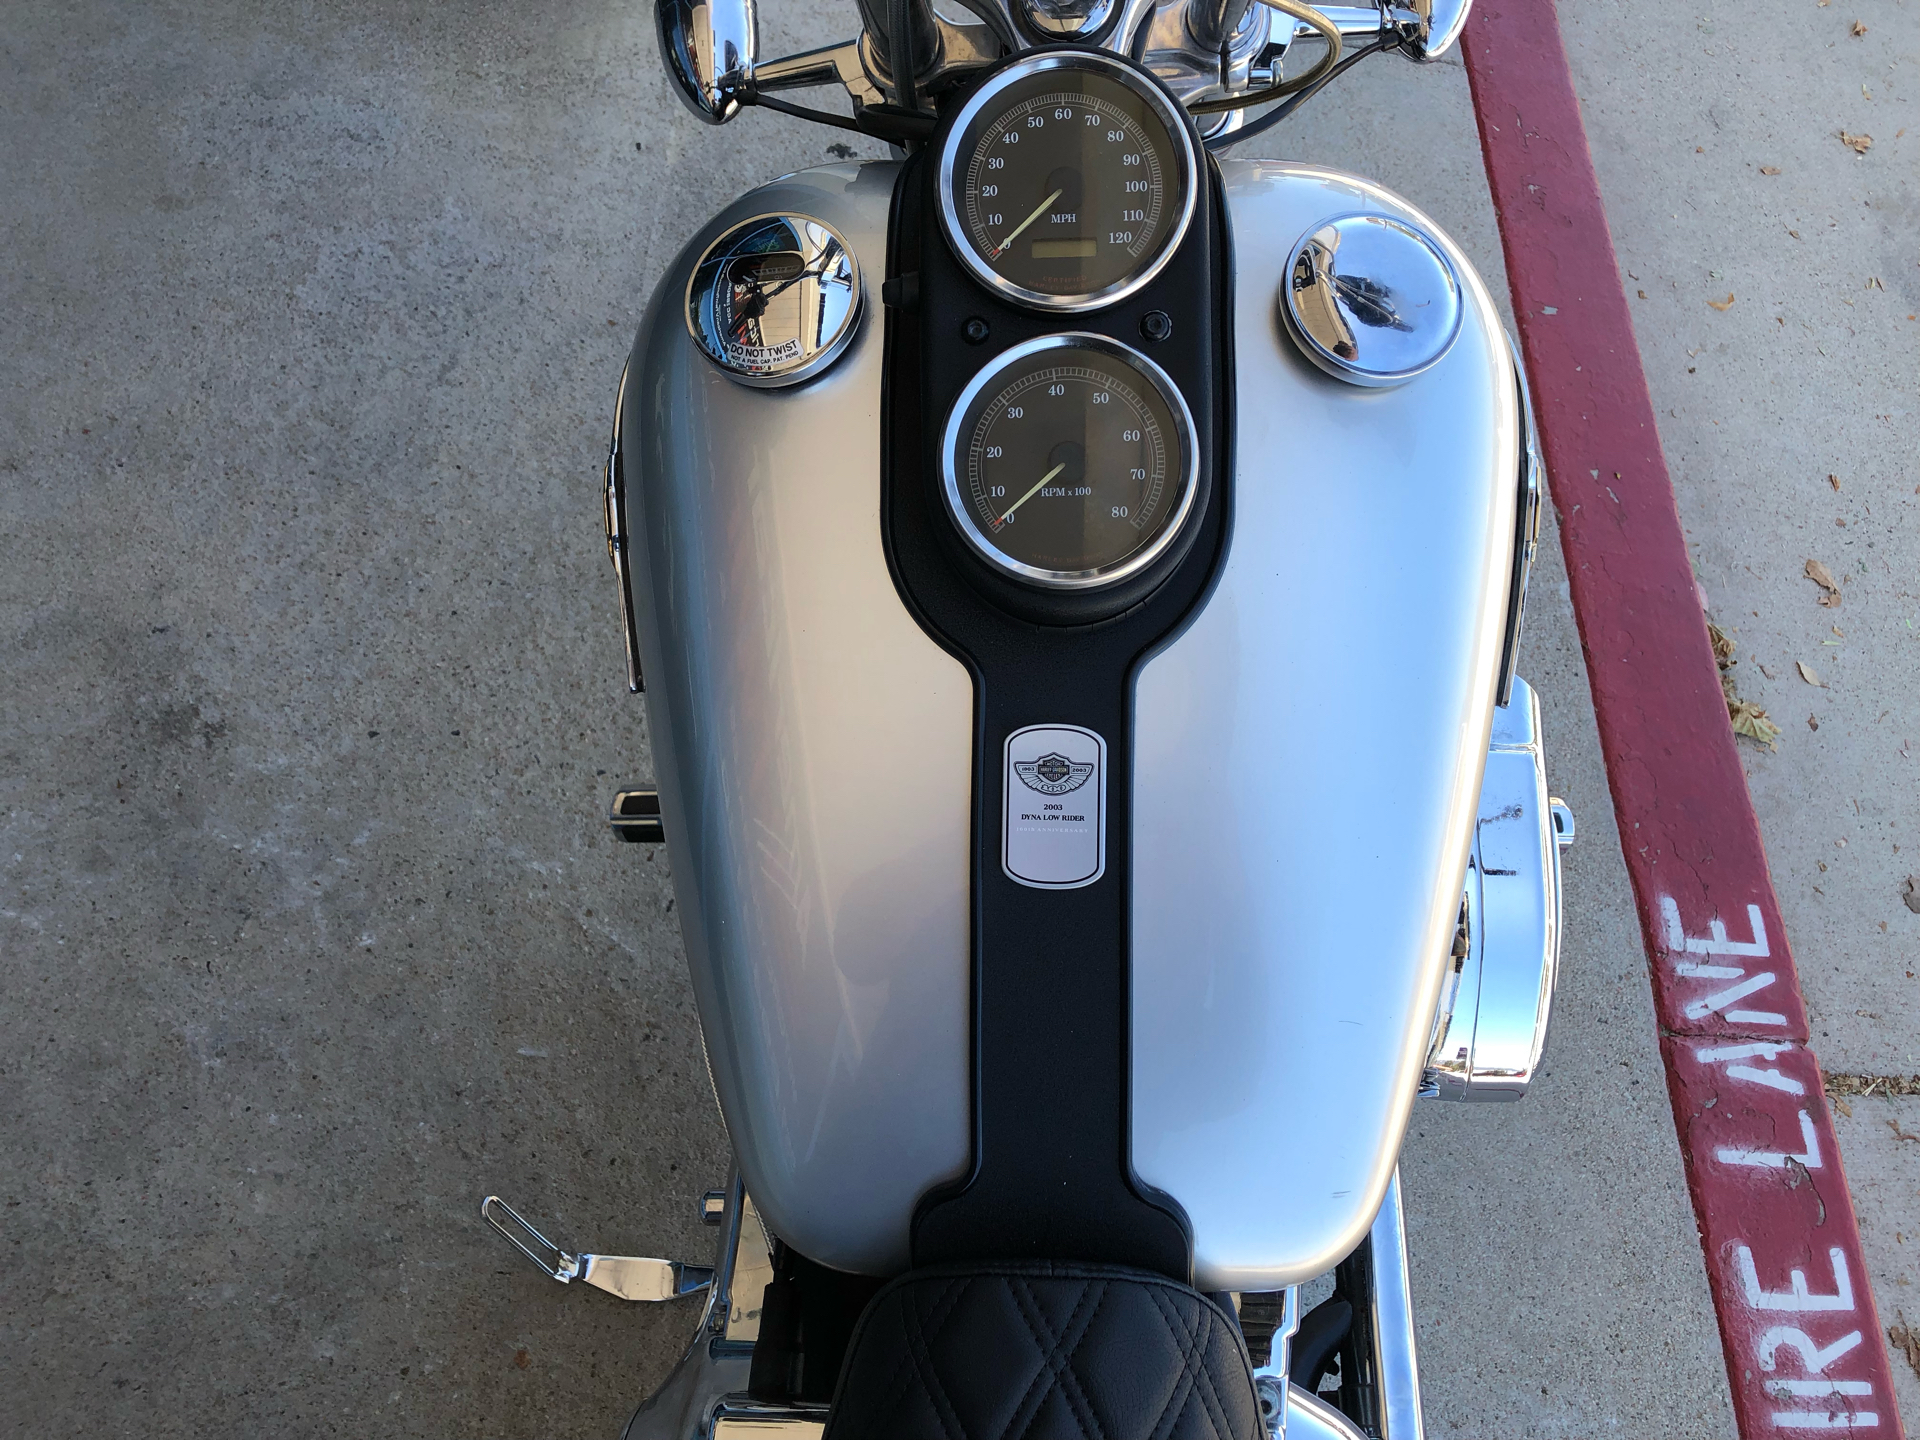 2003 Harley-Davidson FXDL Dyna Low Rider® in Temecula, California - Photo 12